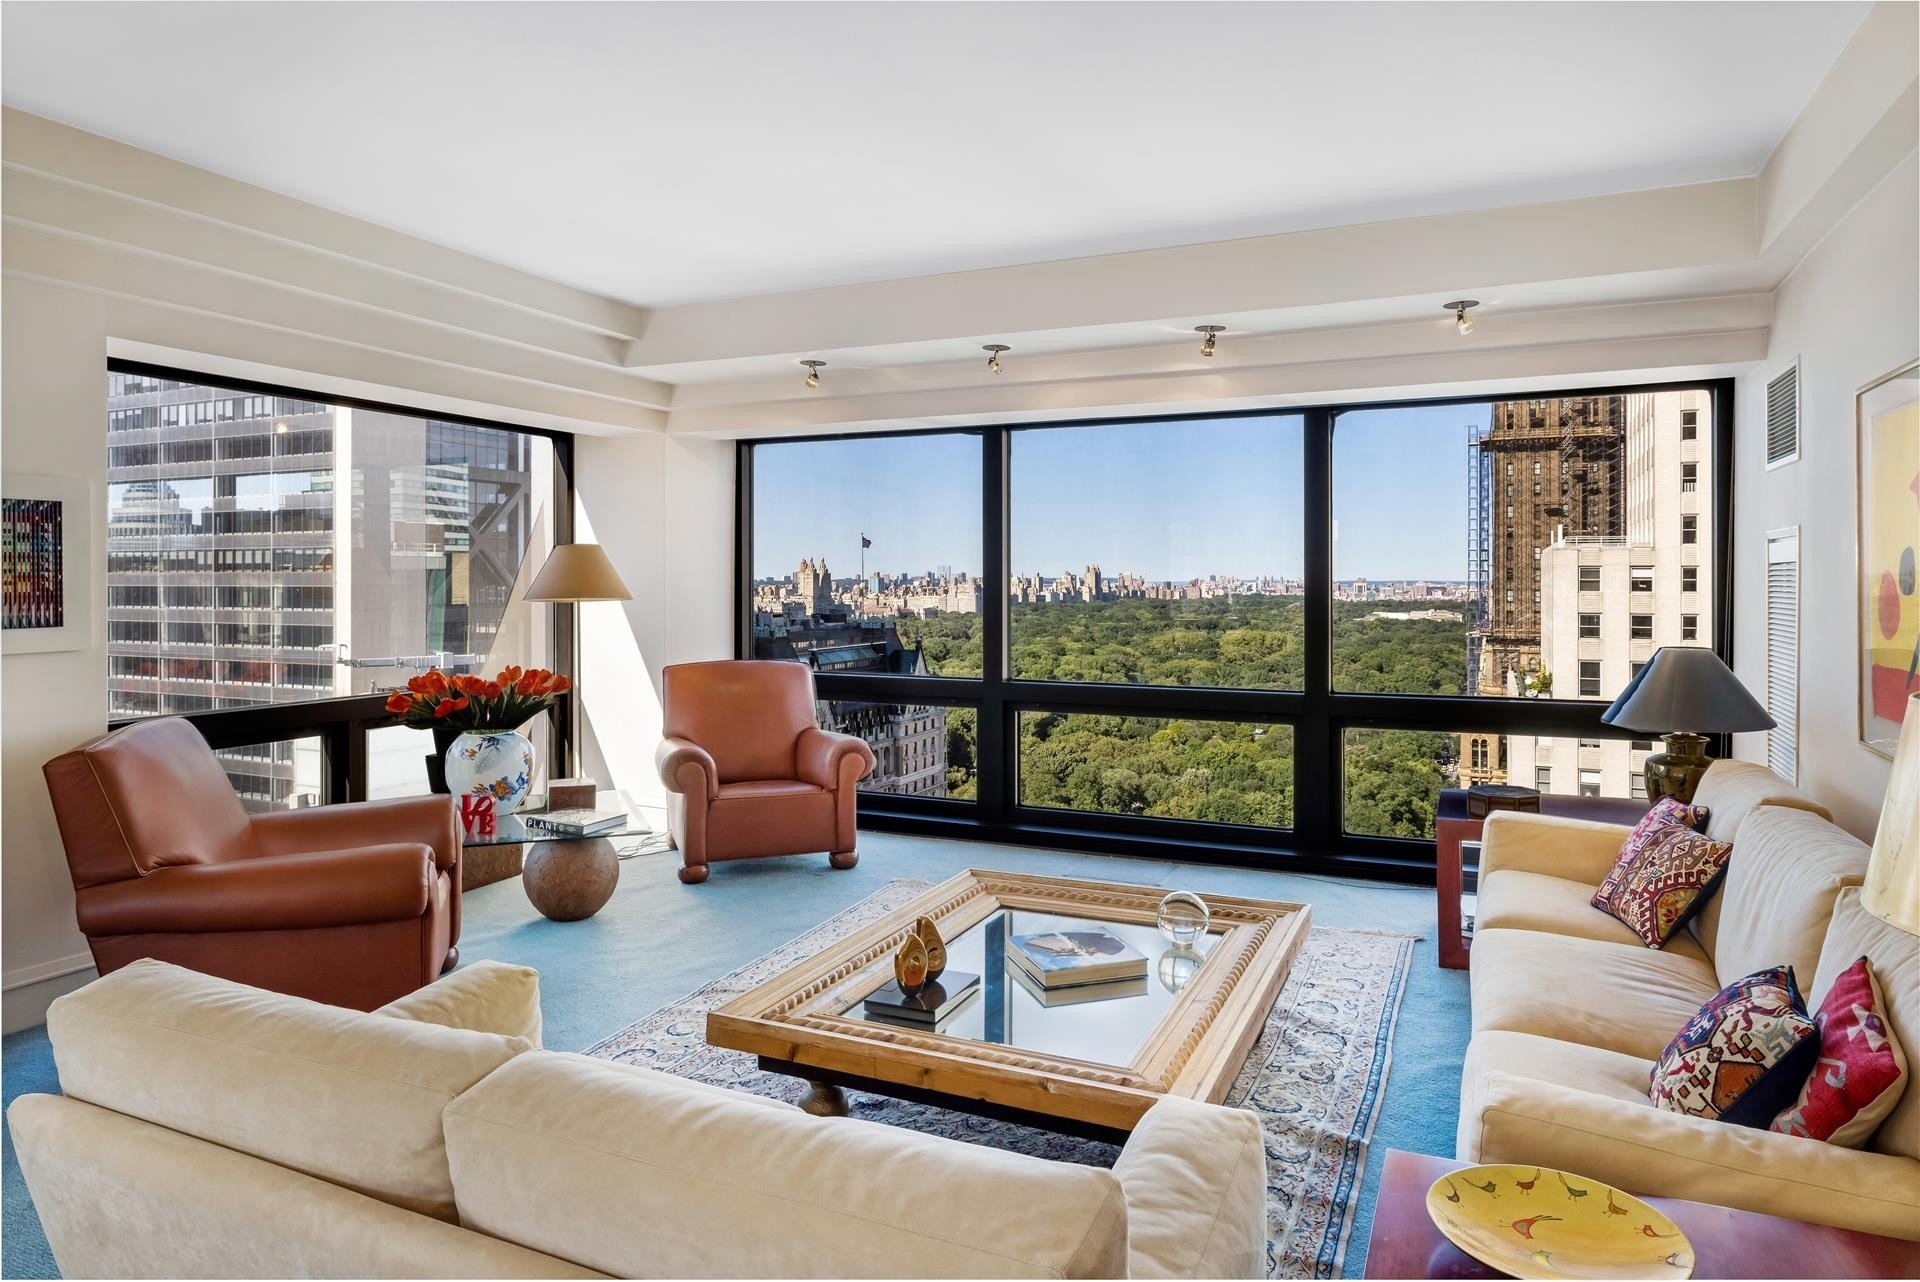 Condominium for Sale at Trump Tower, 721 FIFTH AVE, 32FG Midtown East, New York, NY 10022